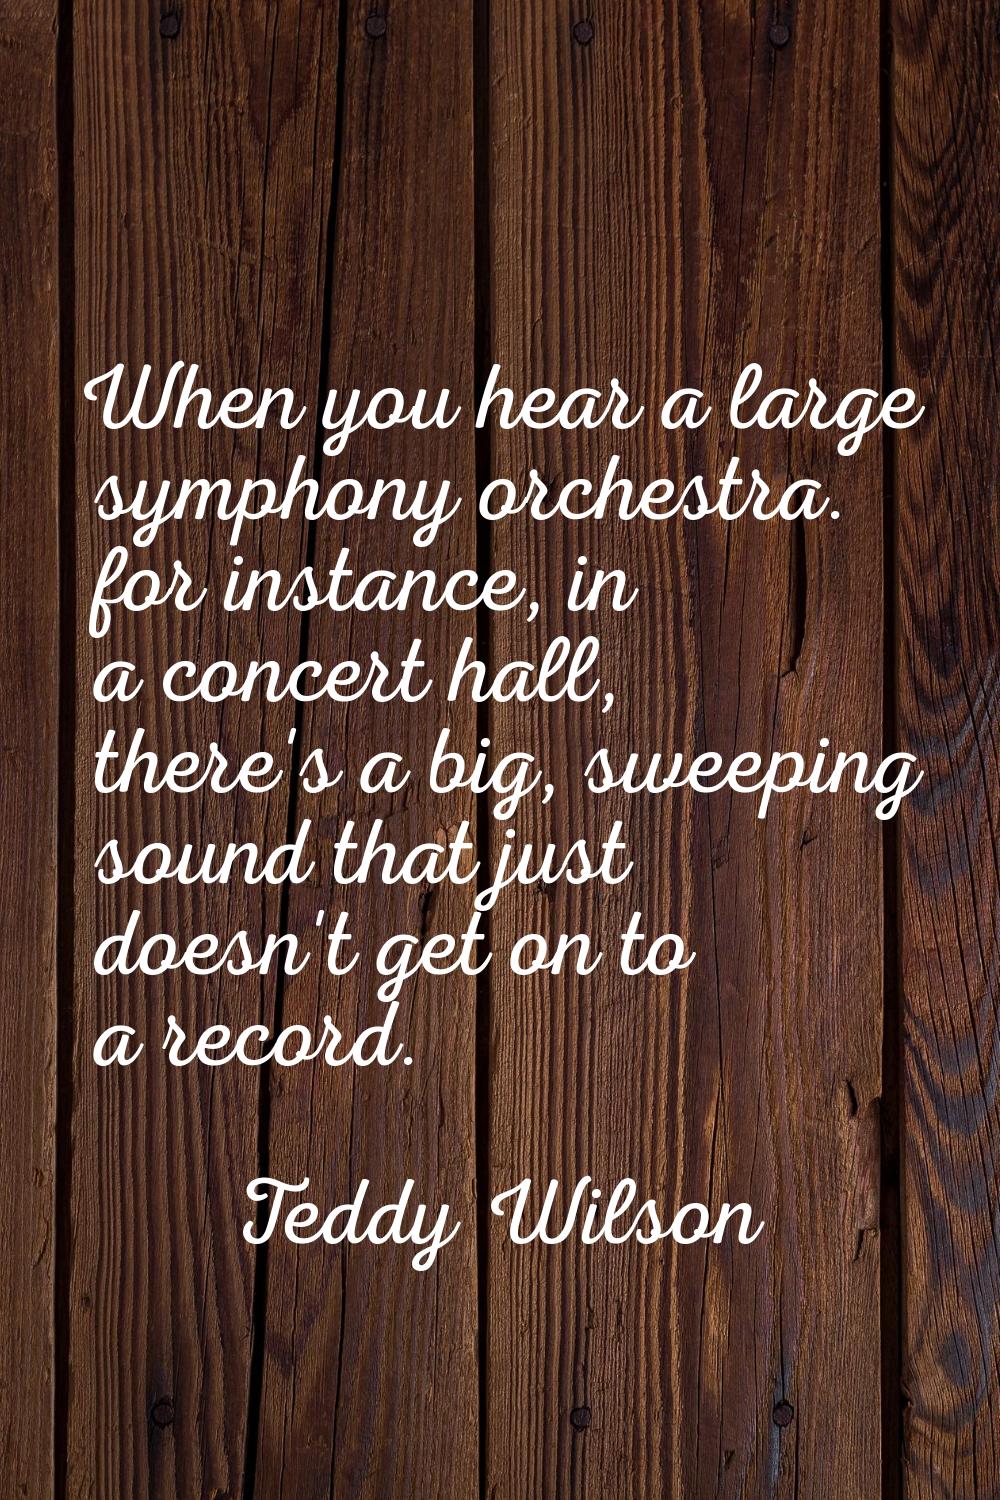 When you hear a large symphony orchestra. for instance, in a concert hall, there's a big, sweeping 